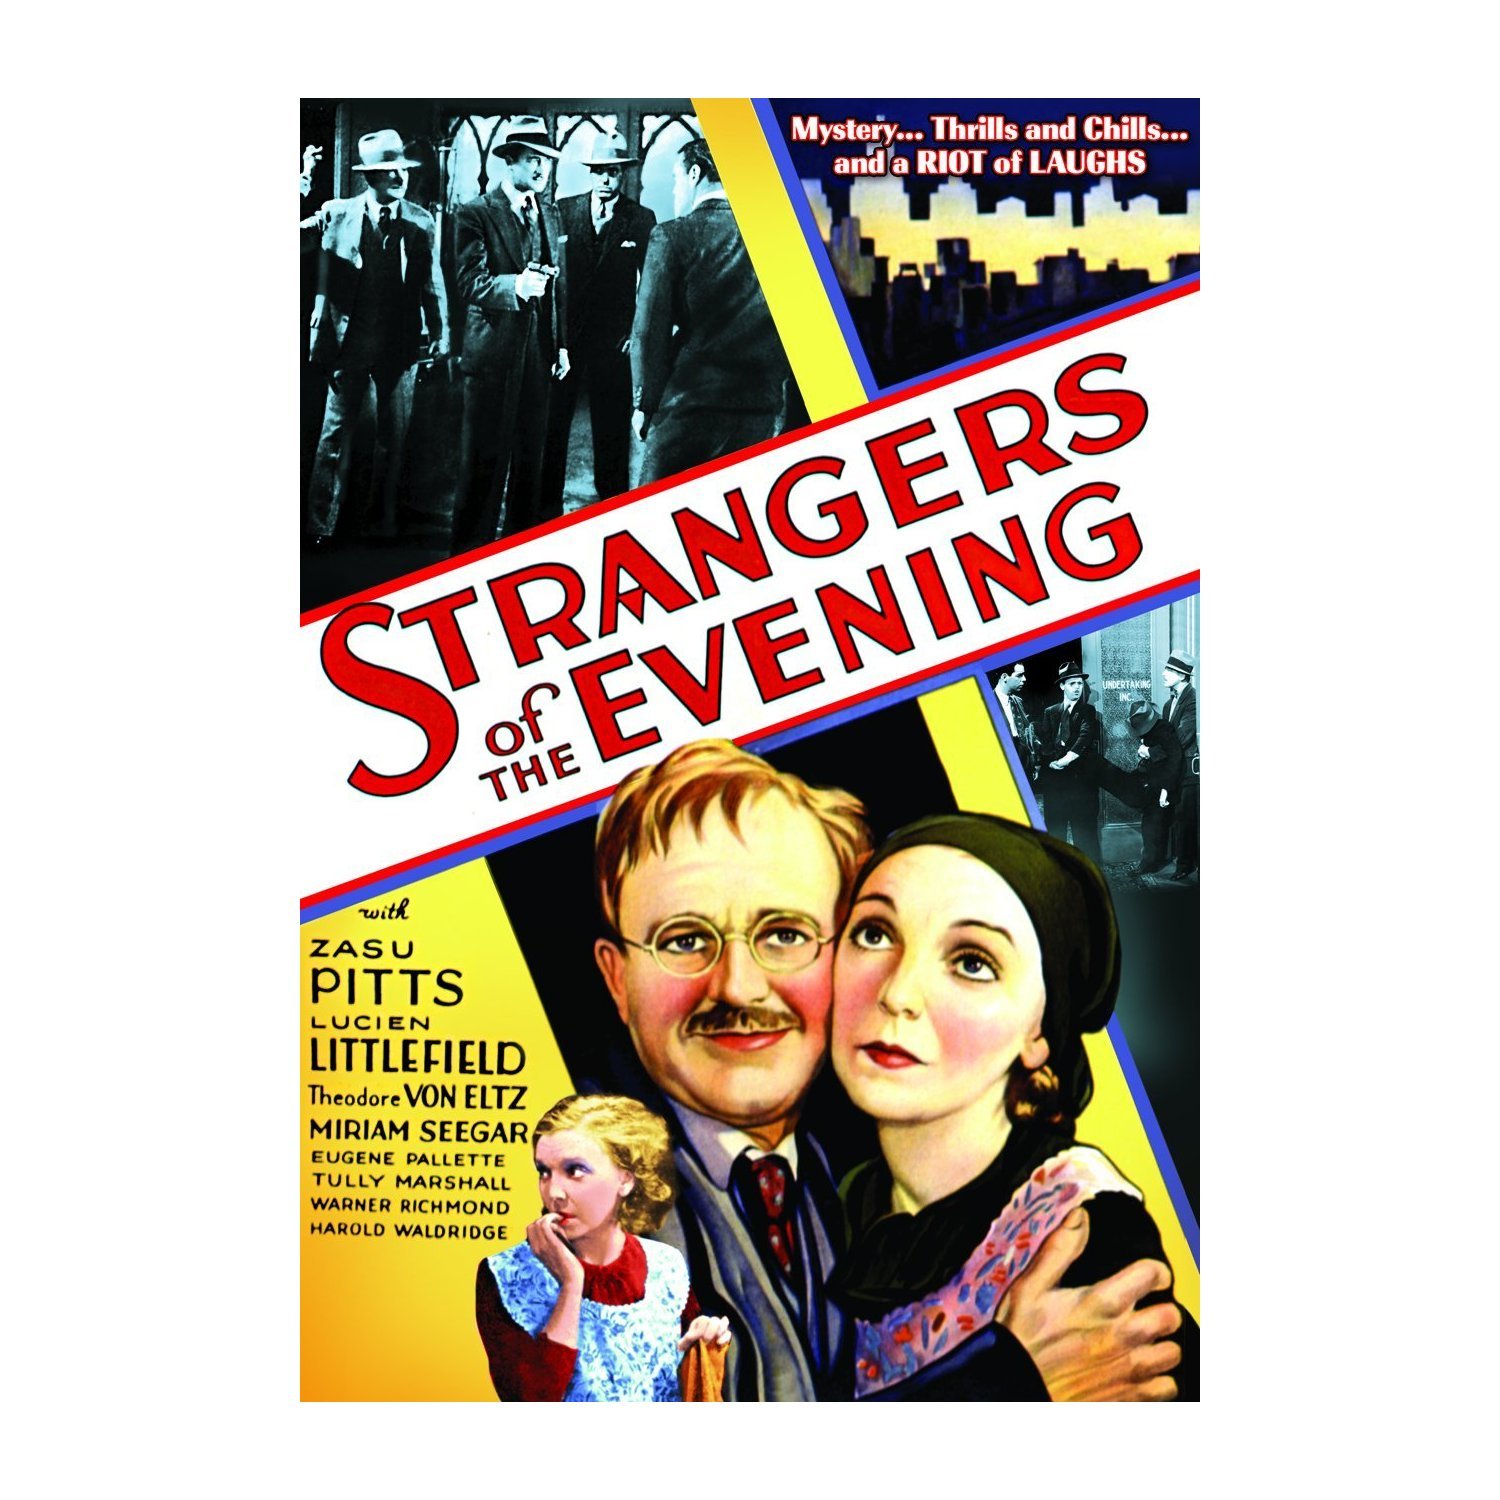 Lucien Littlefield, Zasu Pitts and Miriam Seegar in Strangers of the Evening (1932)